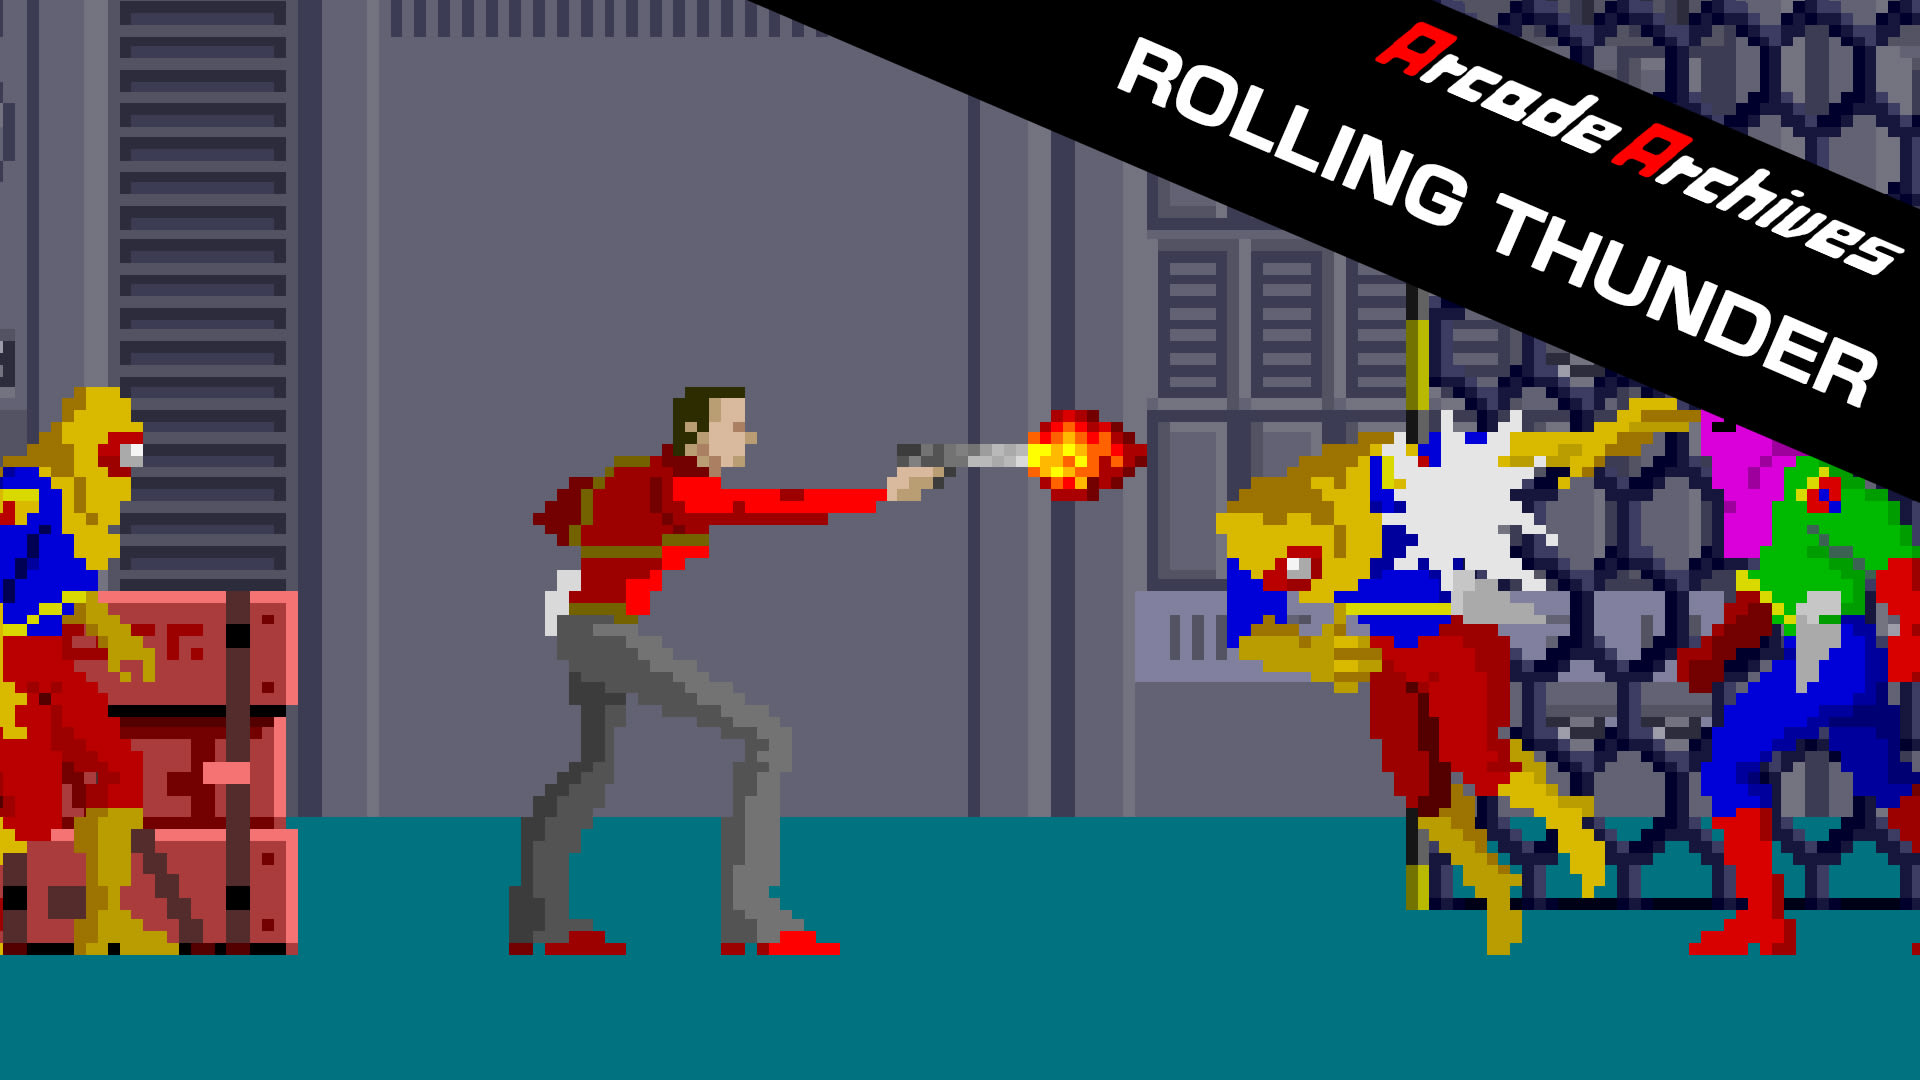 Arcade Archives ROLLING THUNDER 1